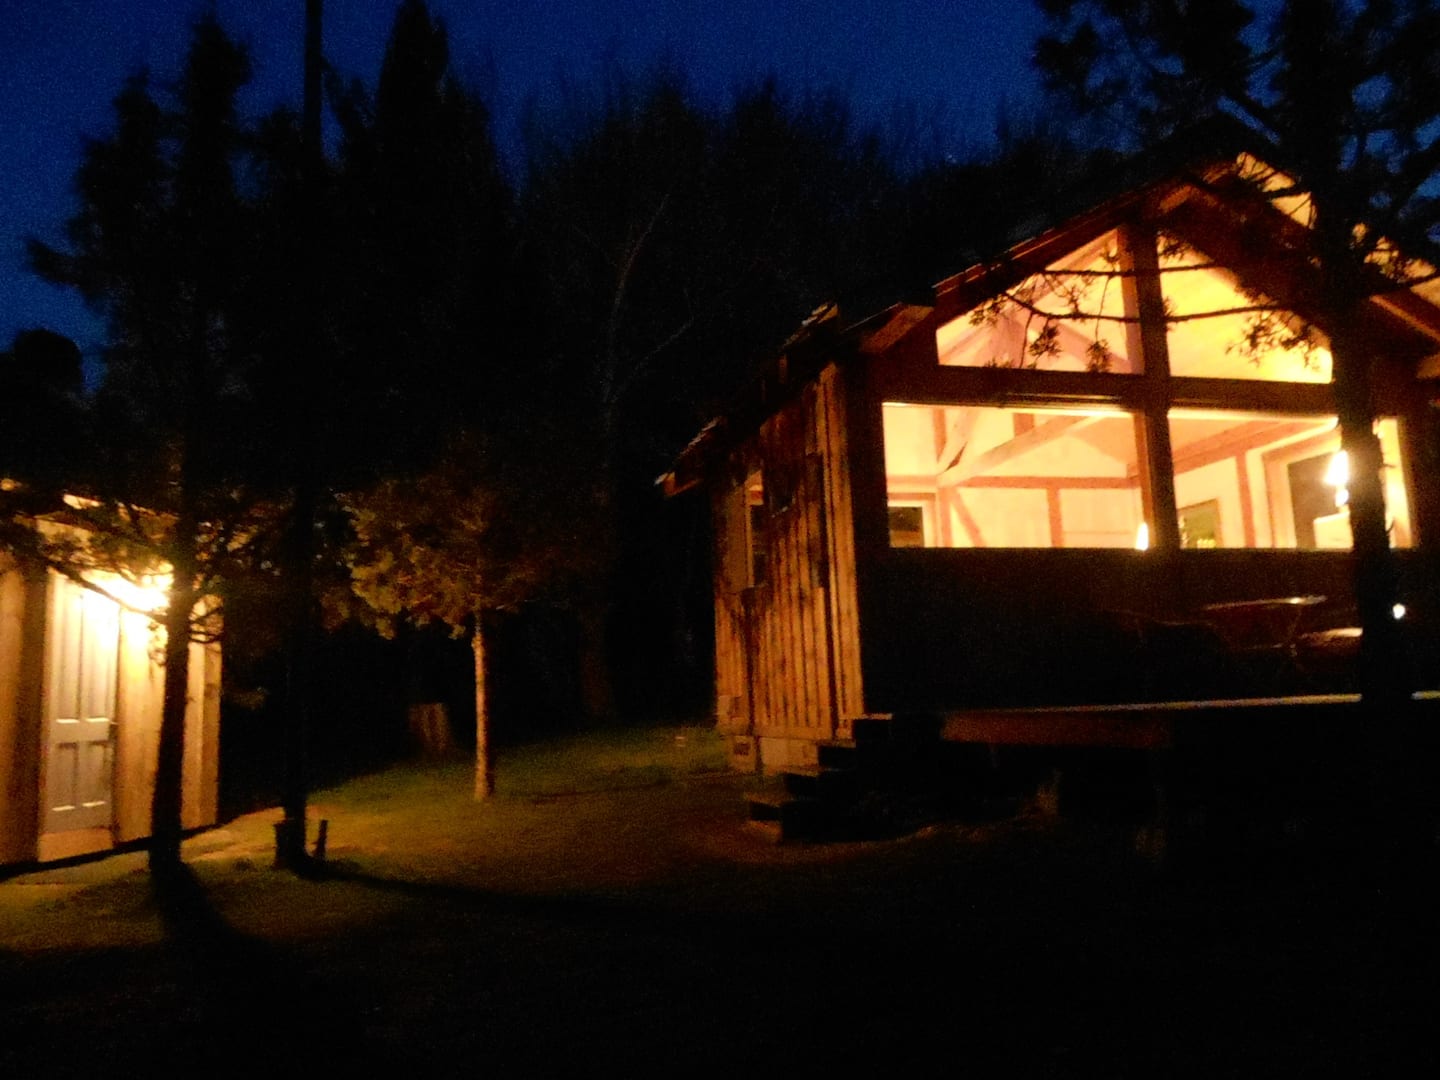 Cabin at night with lights on inside